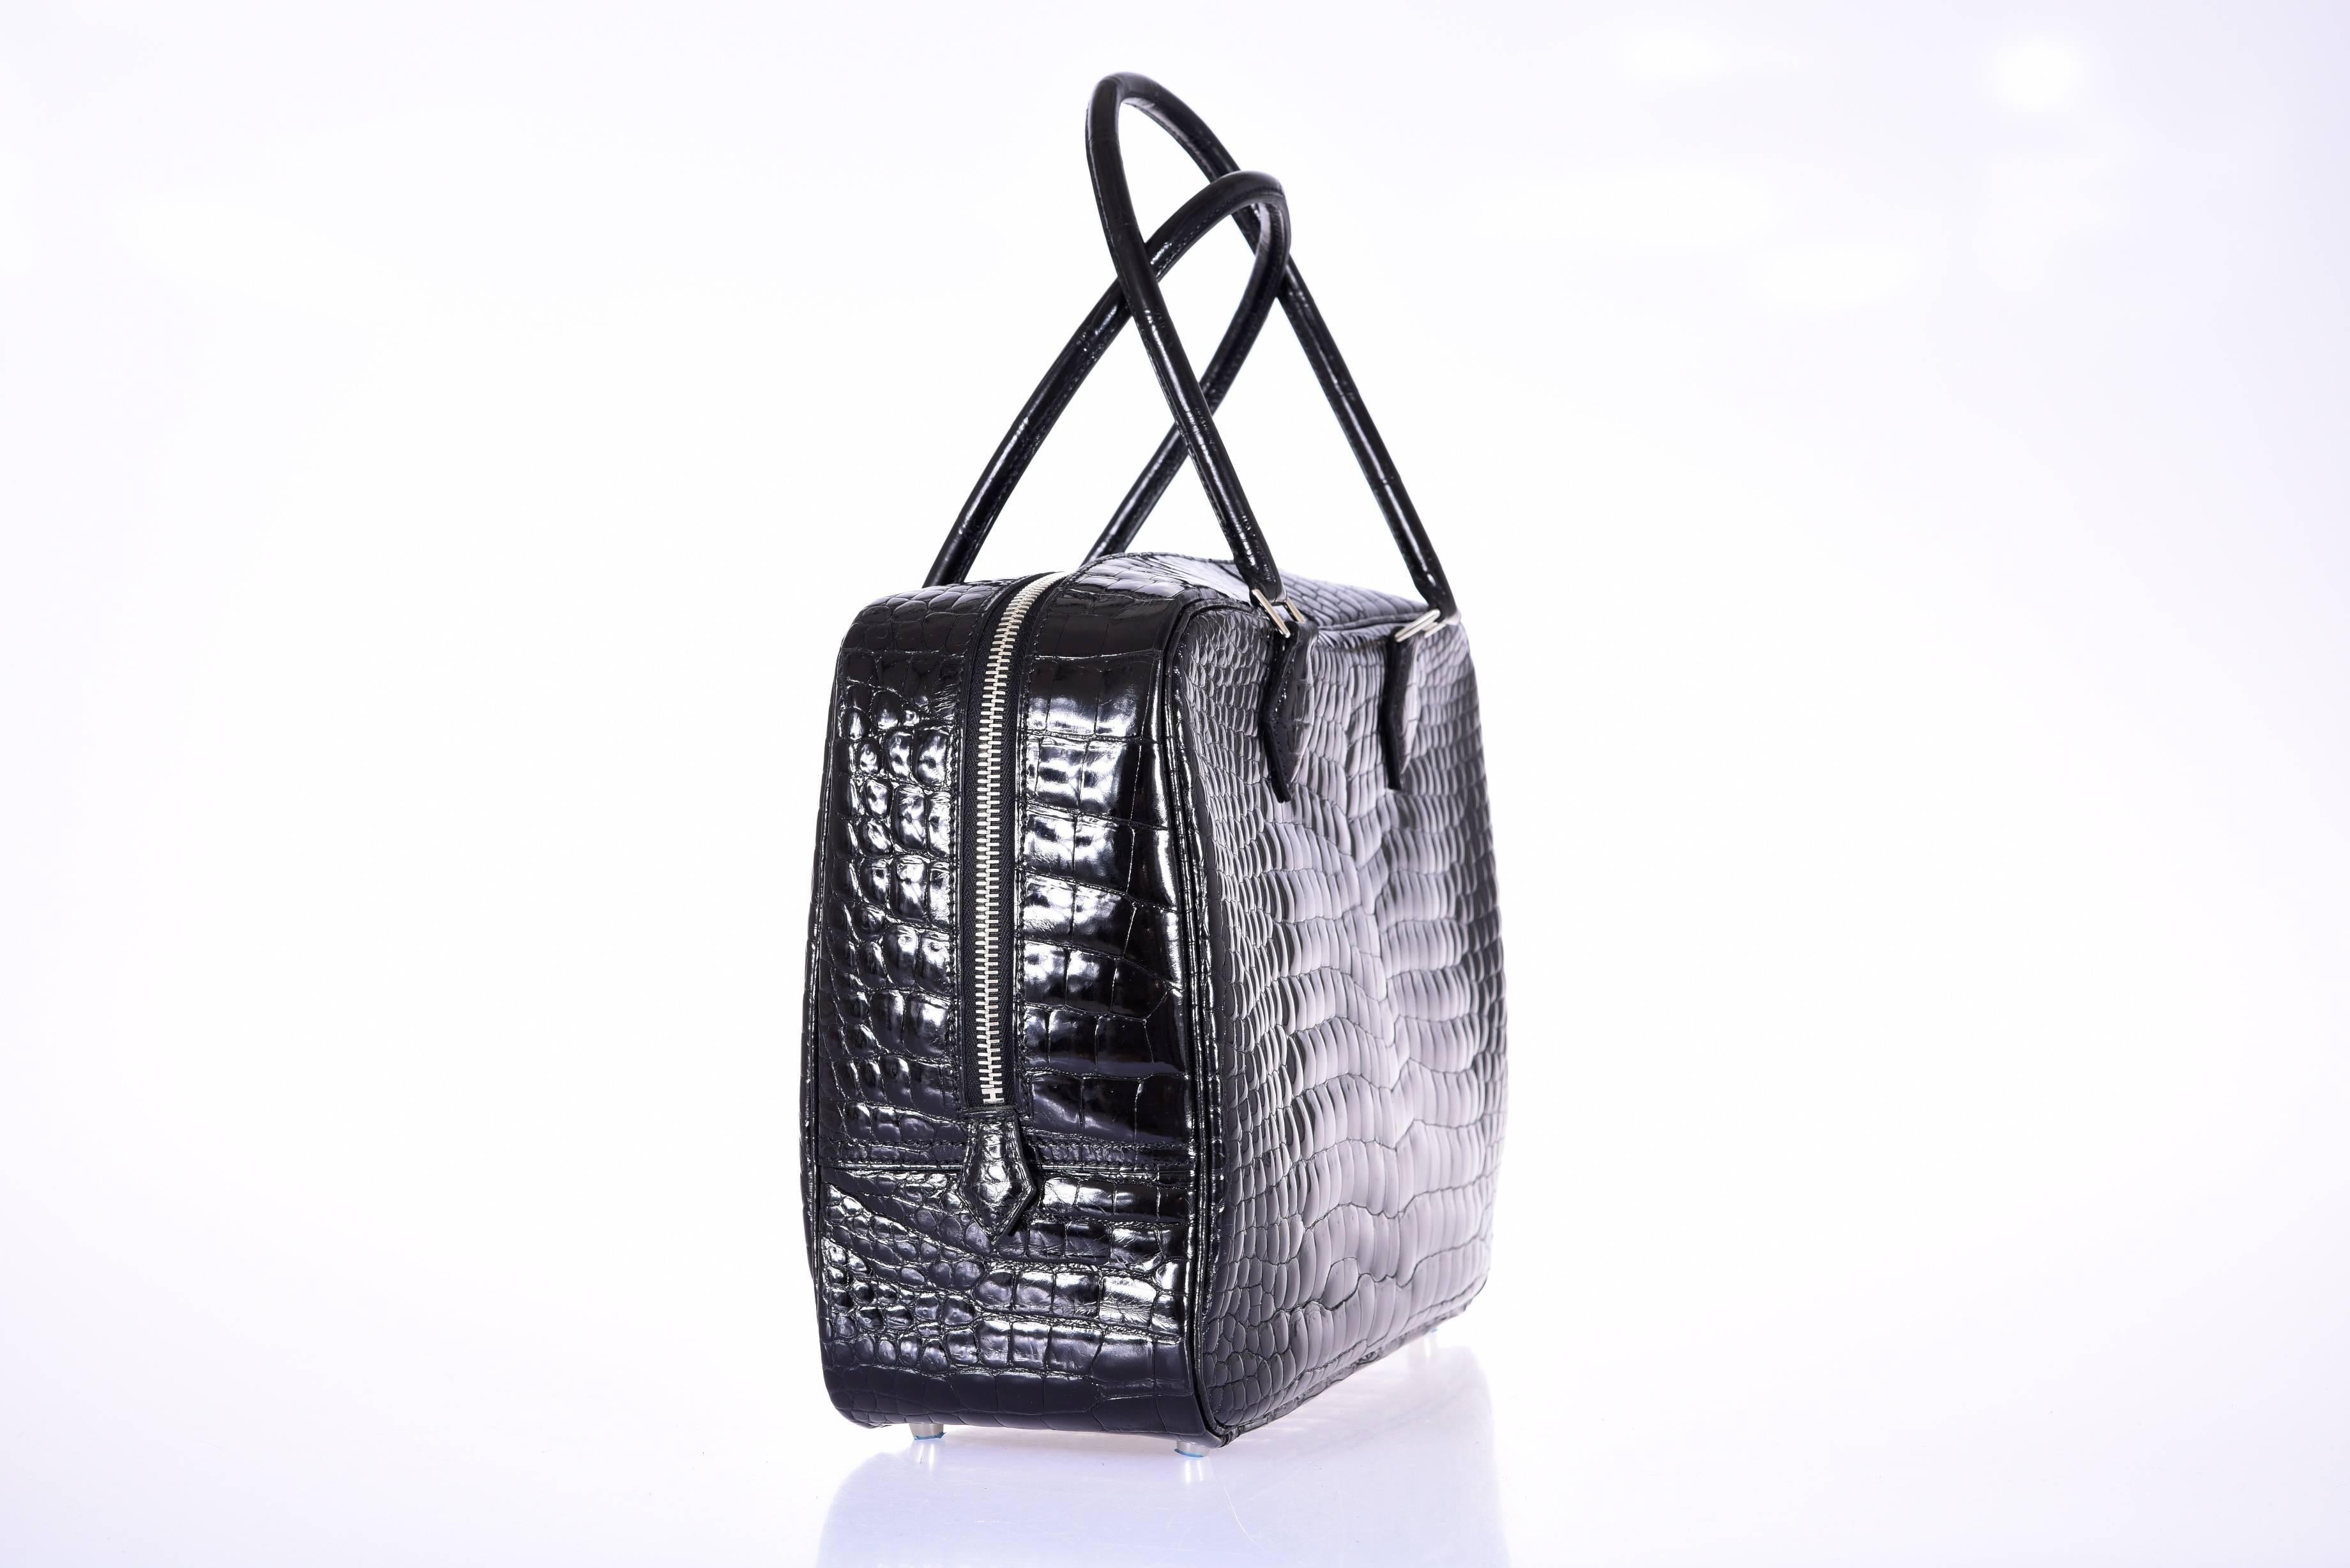 New Condition
HERMES Plume Porosus black crocodile PHW

As always, another one of my fab finds! Hermes very special porosus Plume perfect size for everyday 32cm! 

Includes: Hermes box, dust bag, booklet 
Origin: France
Production Year: